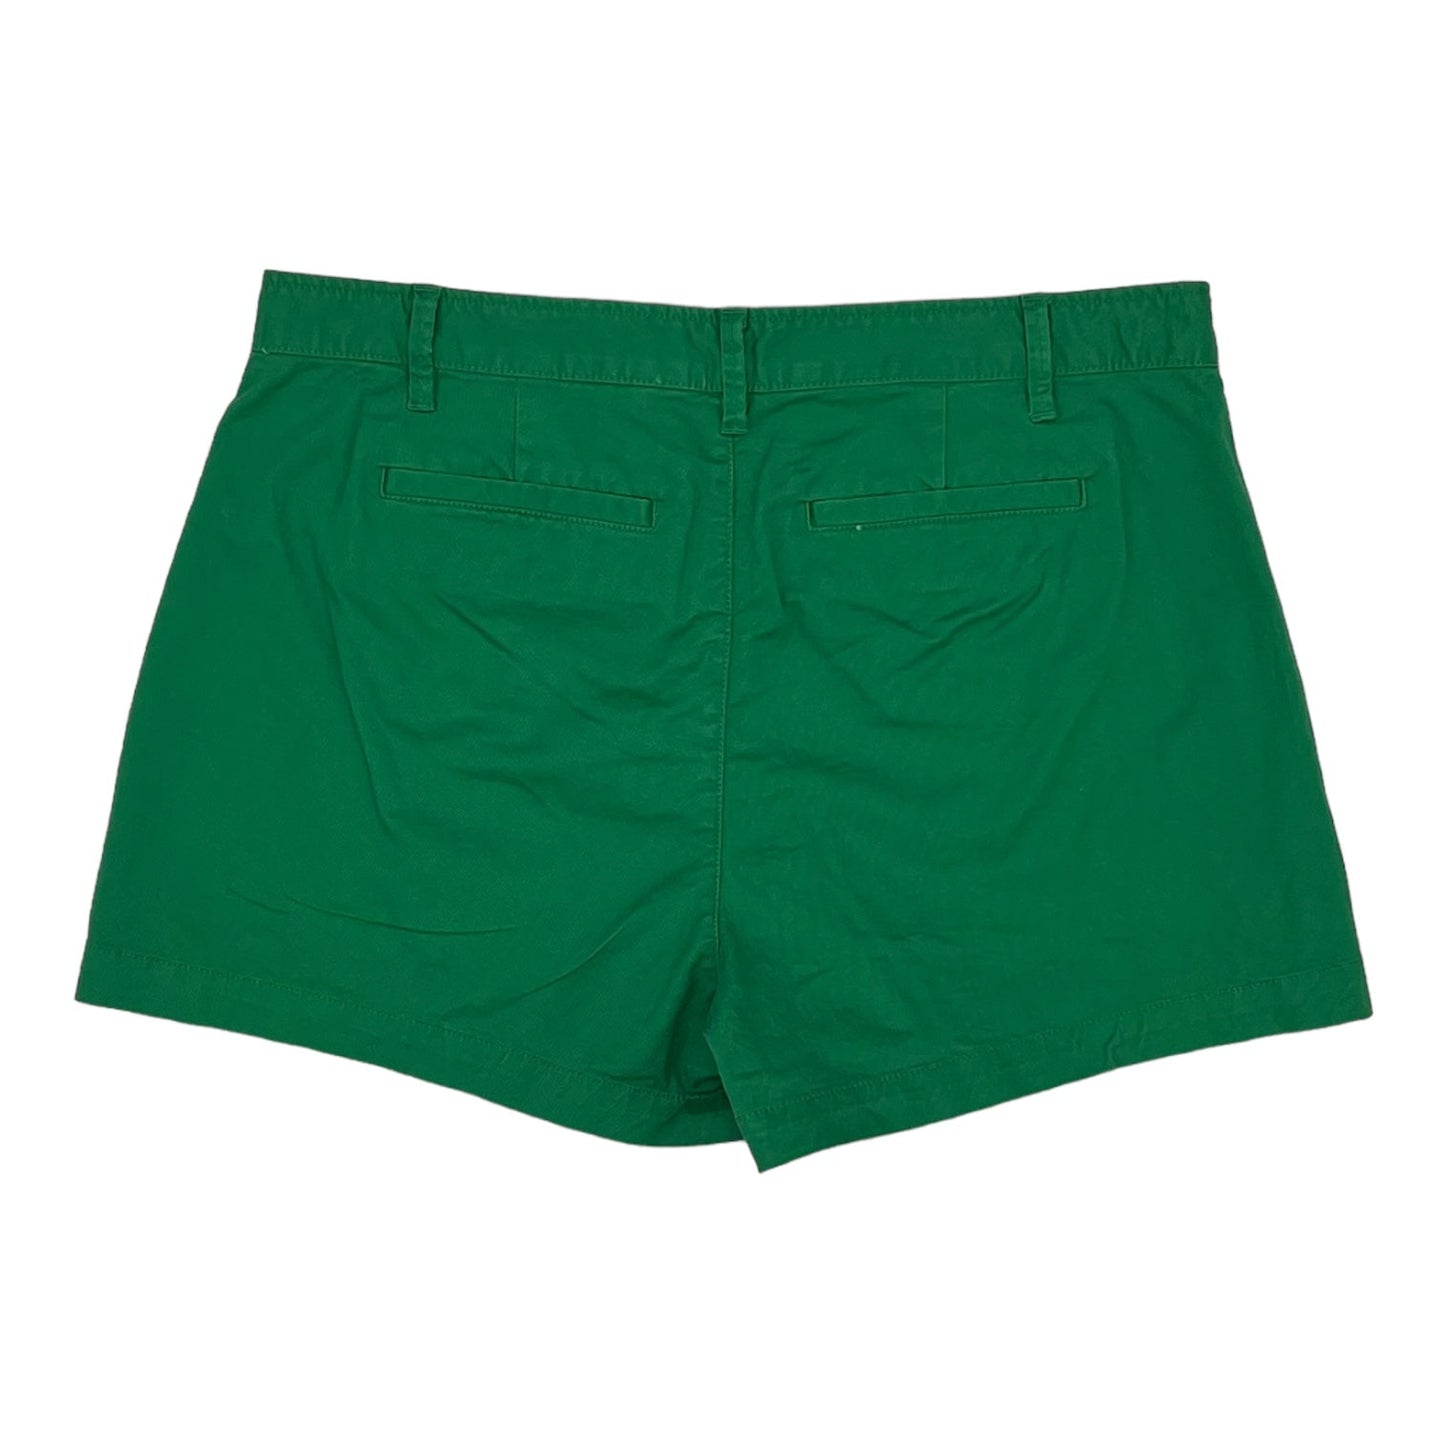 GREEN SHORTS by FREE ASSEMBLY Size:12